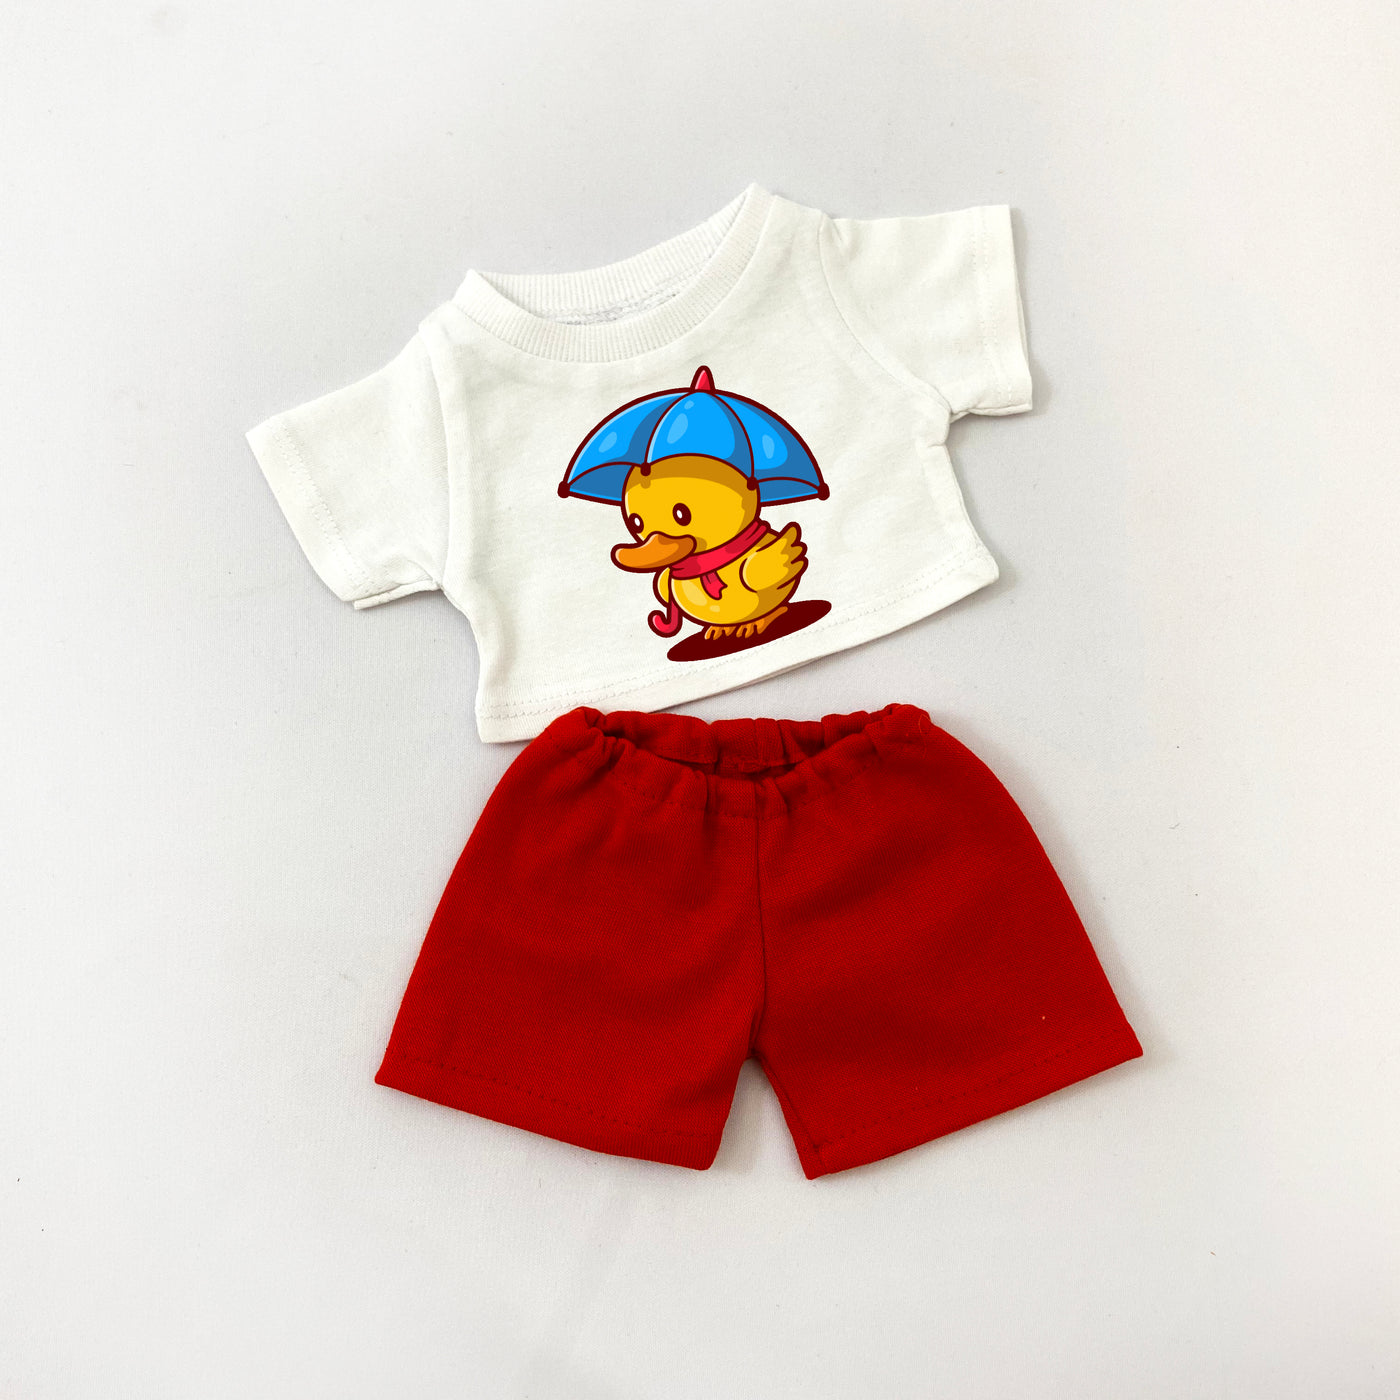 Rag Doll Outfit - Duckling